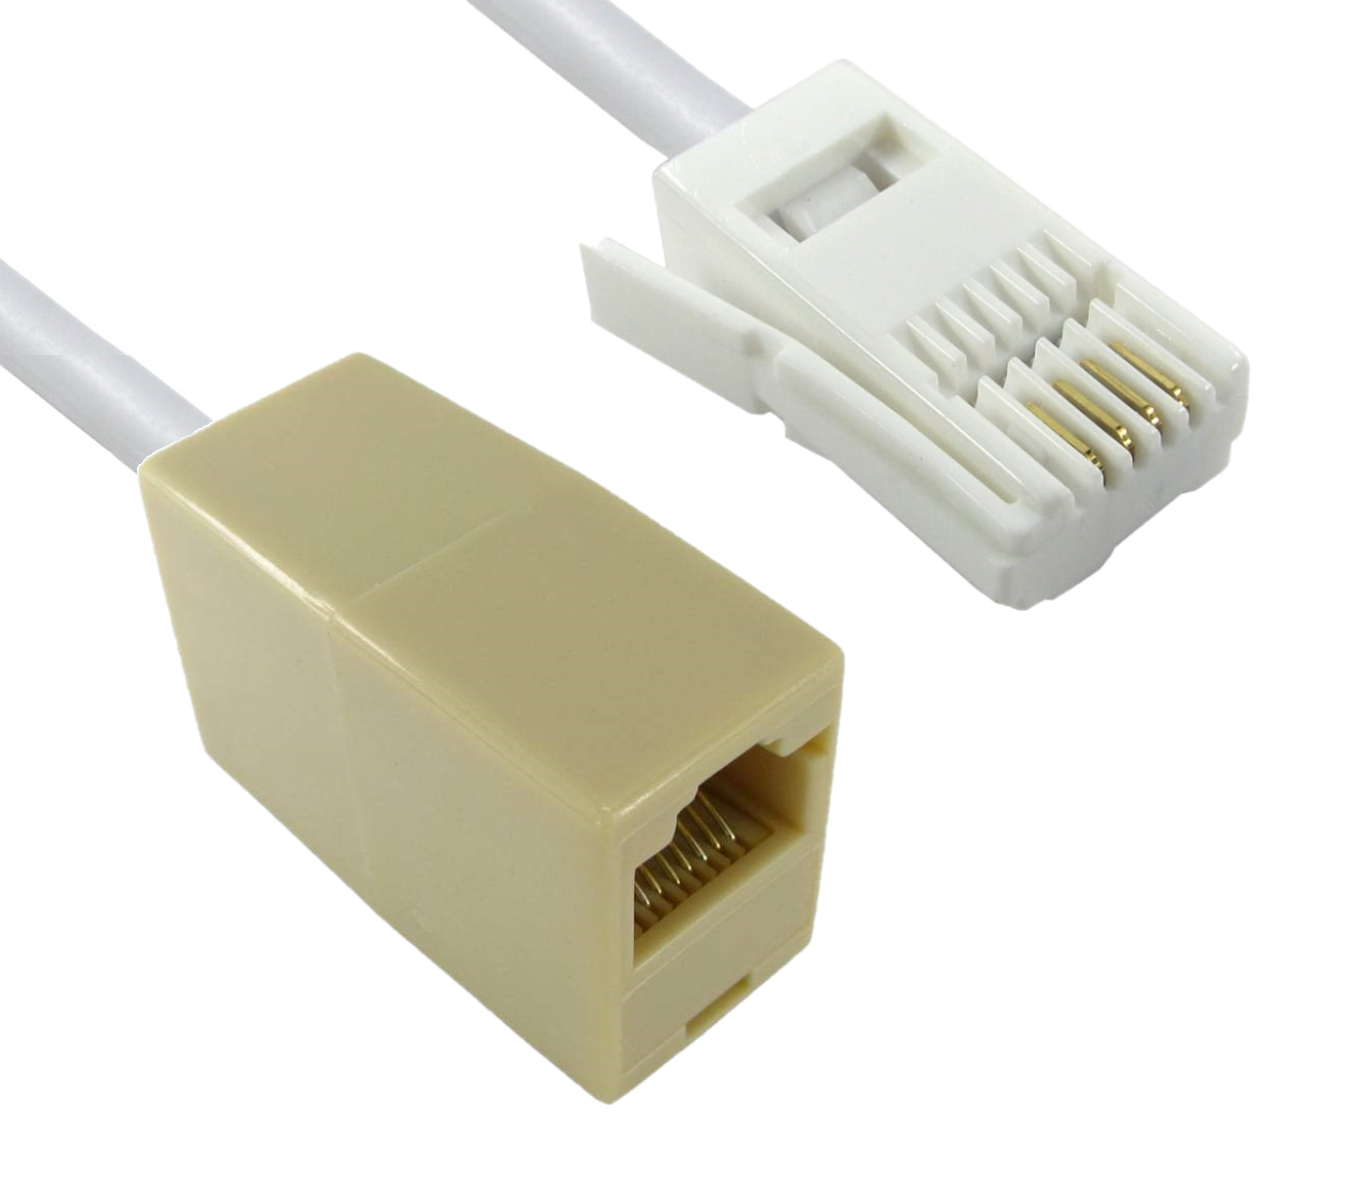 BT Male to RJ45 Female Extension Leads